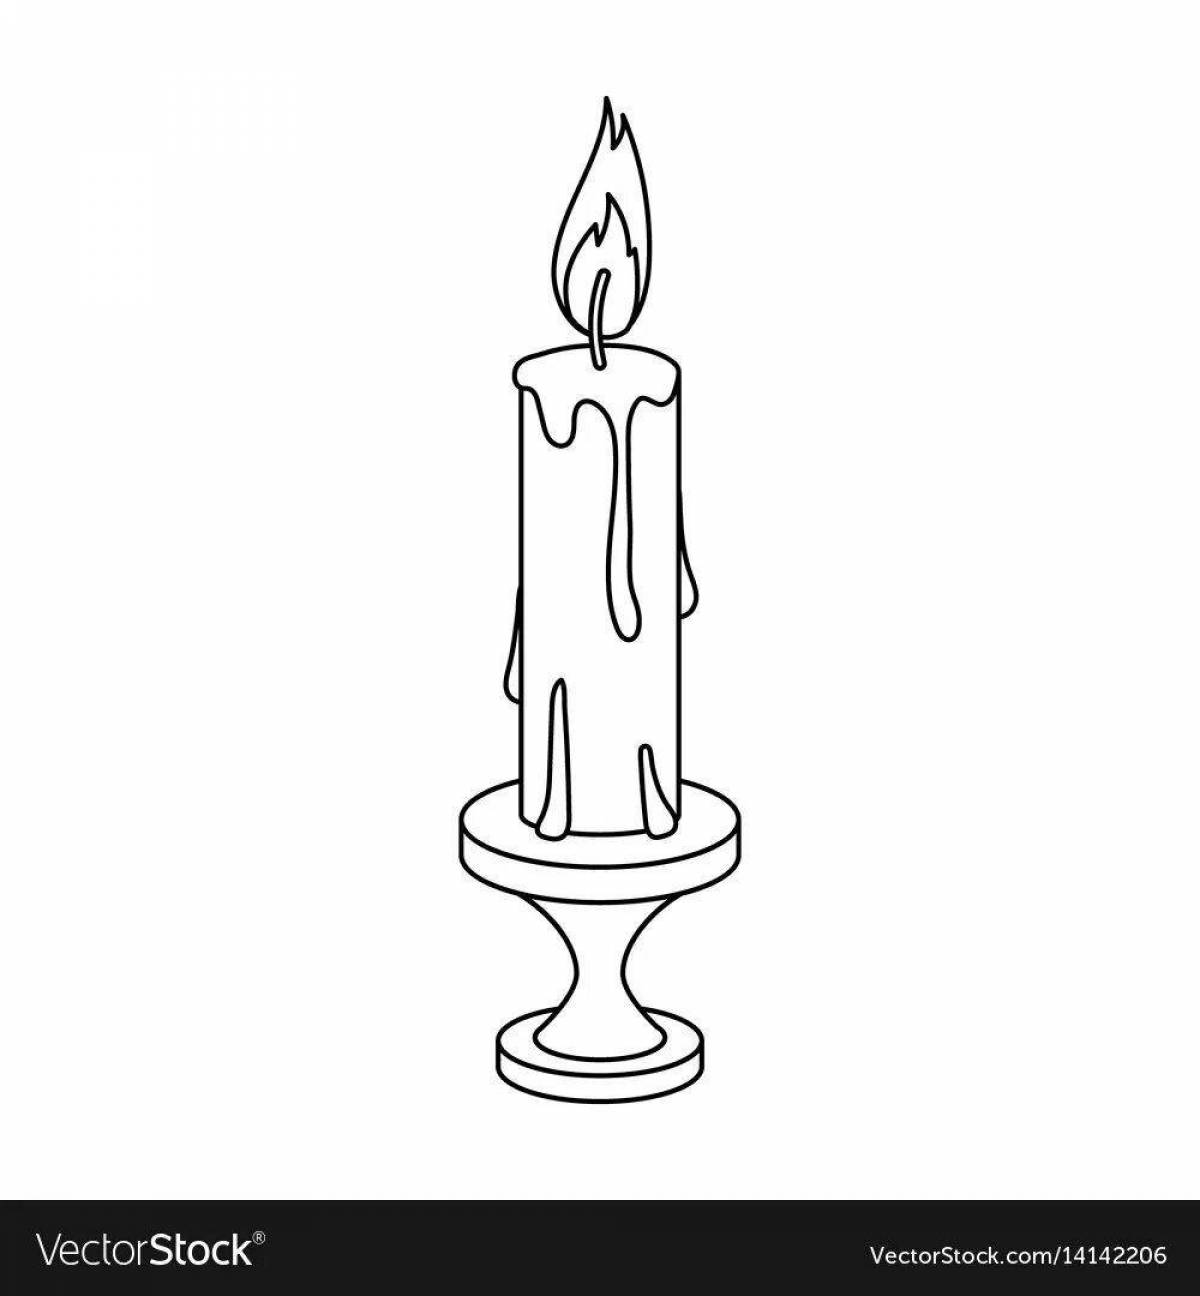 Merry Candle of Memory coloring page